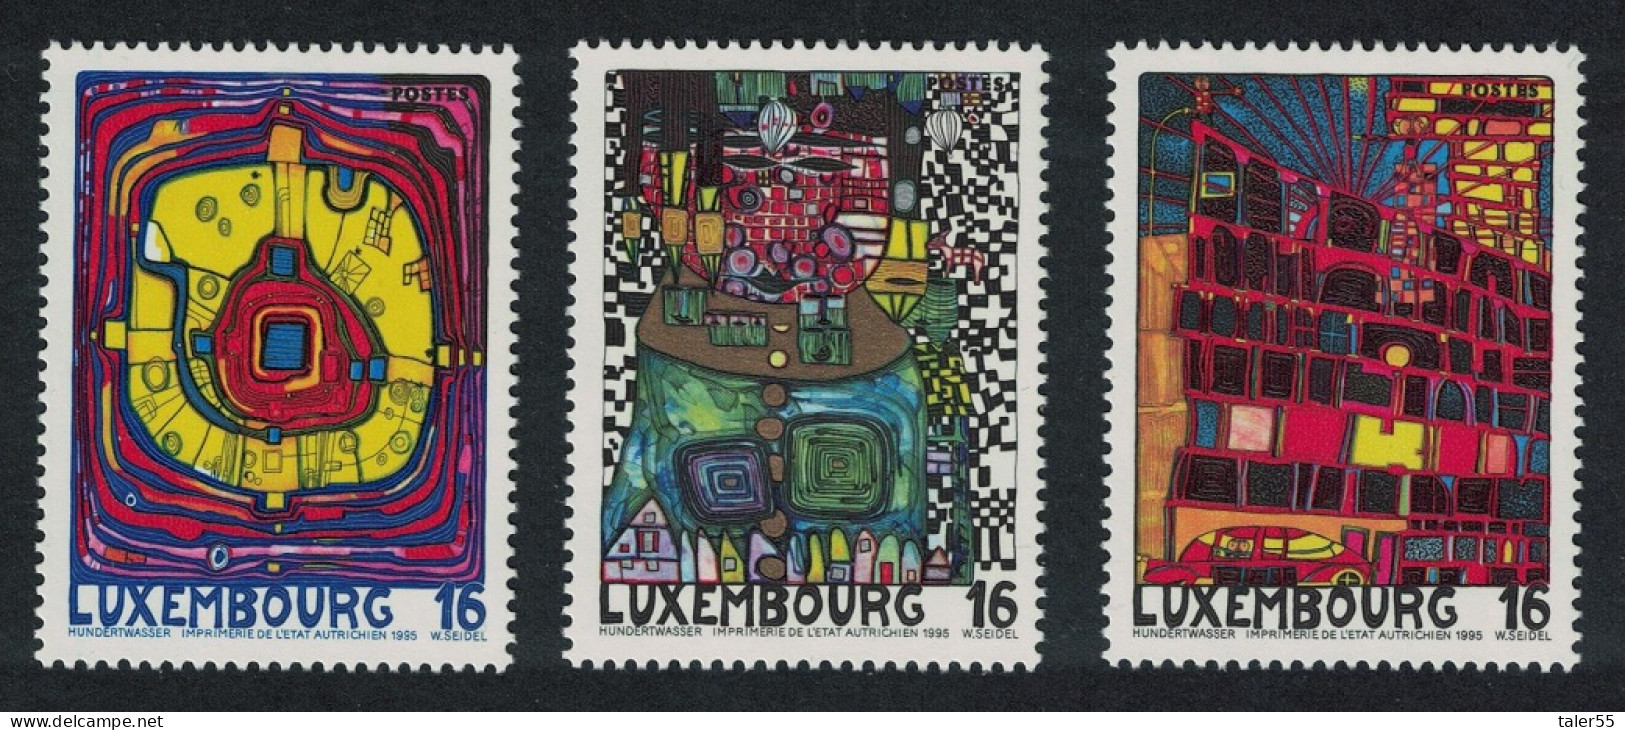 Luxembourg European City Of Culture 3v 1995 MNH SG#1387-1389 MI#1360-1362 - Neufs